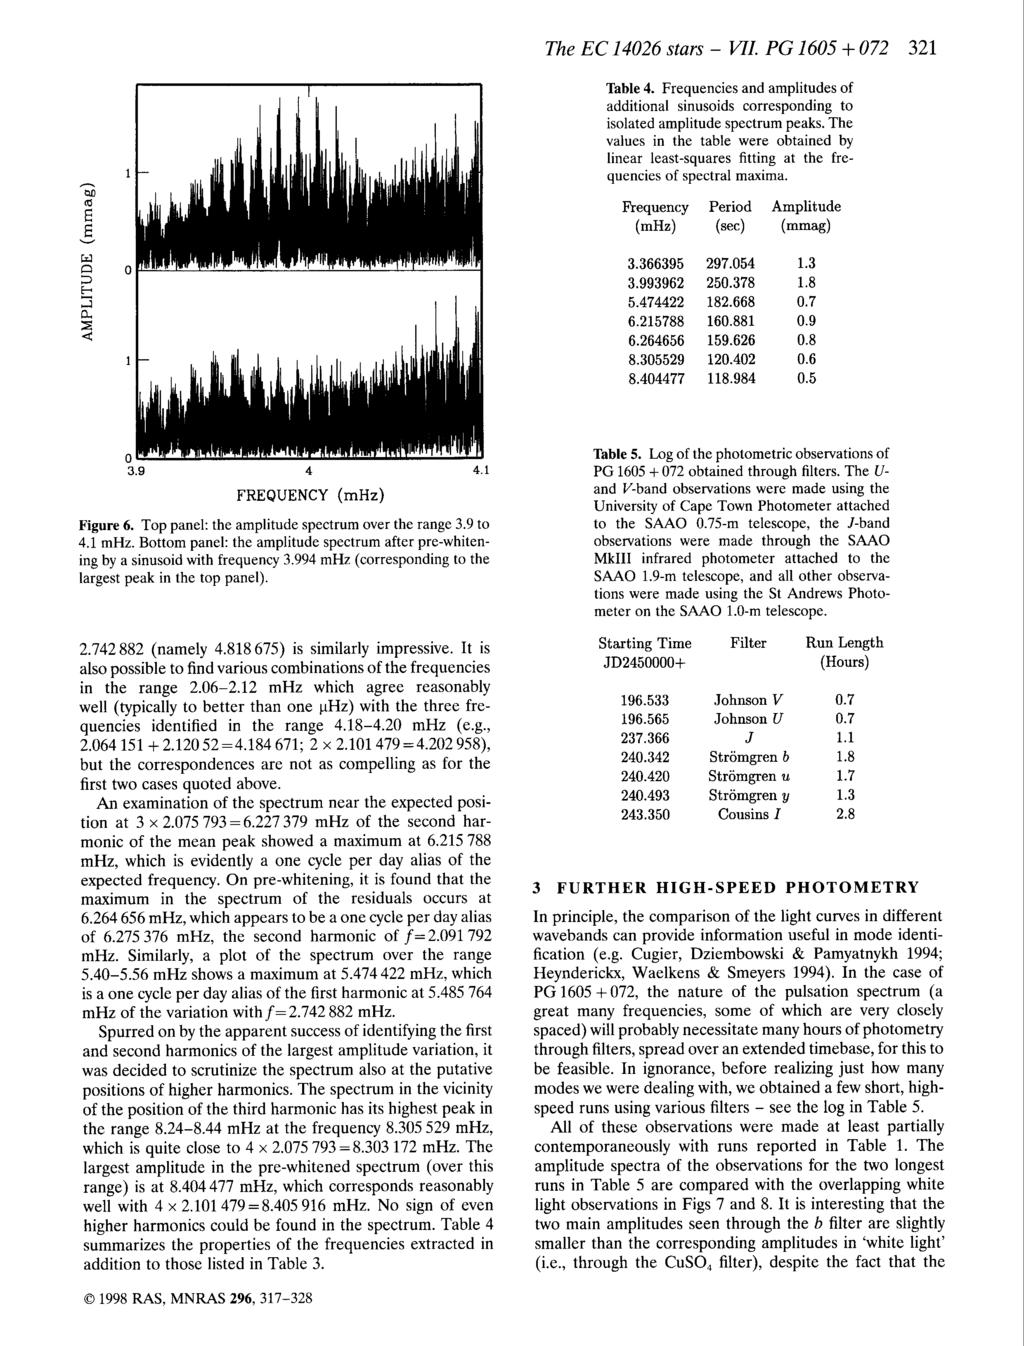 The EC 426 stars - VII. PG 65 + 72 32 on Table 4. Frequencies and amplitudes of additional sinusoids corresponding to isolated amplitude spectrum peaks.